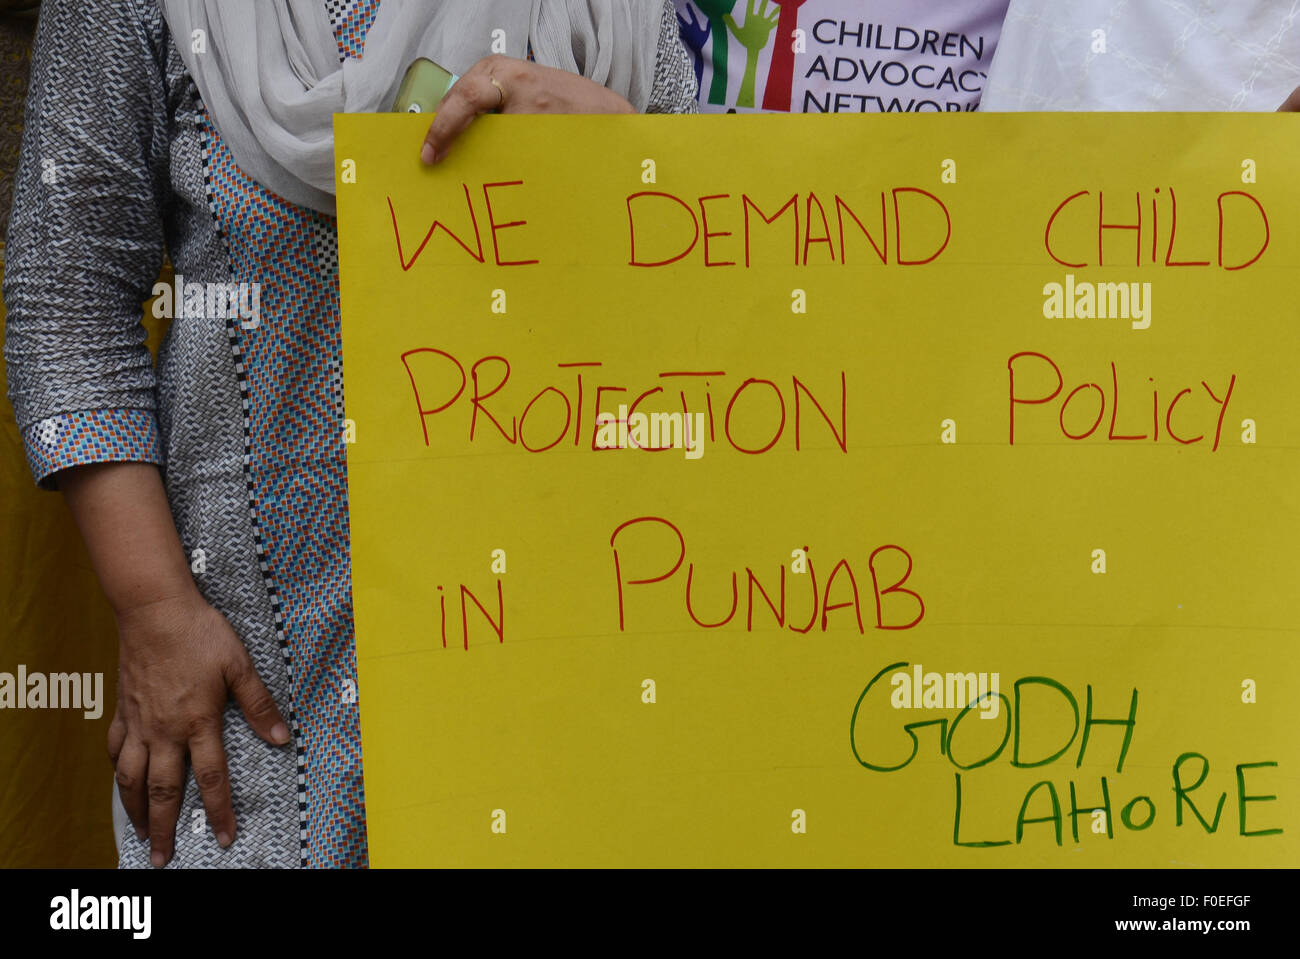 Lahore, Pakistan. 13th Aug, 2015. The activists of the Pakistani NGO Child rights Movement Punjab and Pakistan Pediatric Association Punjab hold placards during a protest against child abuse in Lahore. Three Pakistani police officers have been transferred to other districts accused of negligence amid the deepening scandal over a pedophile ring alleged to have abused hundreds of children for nearly a decade, officials said. © Rana Sajid Hussain/Pacific Press/Alamy Live News Stock Photo